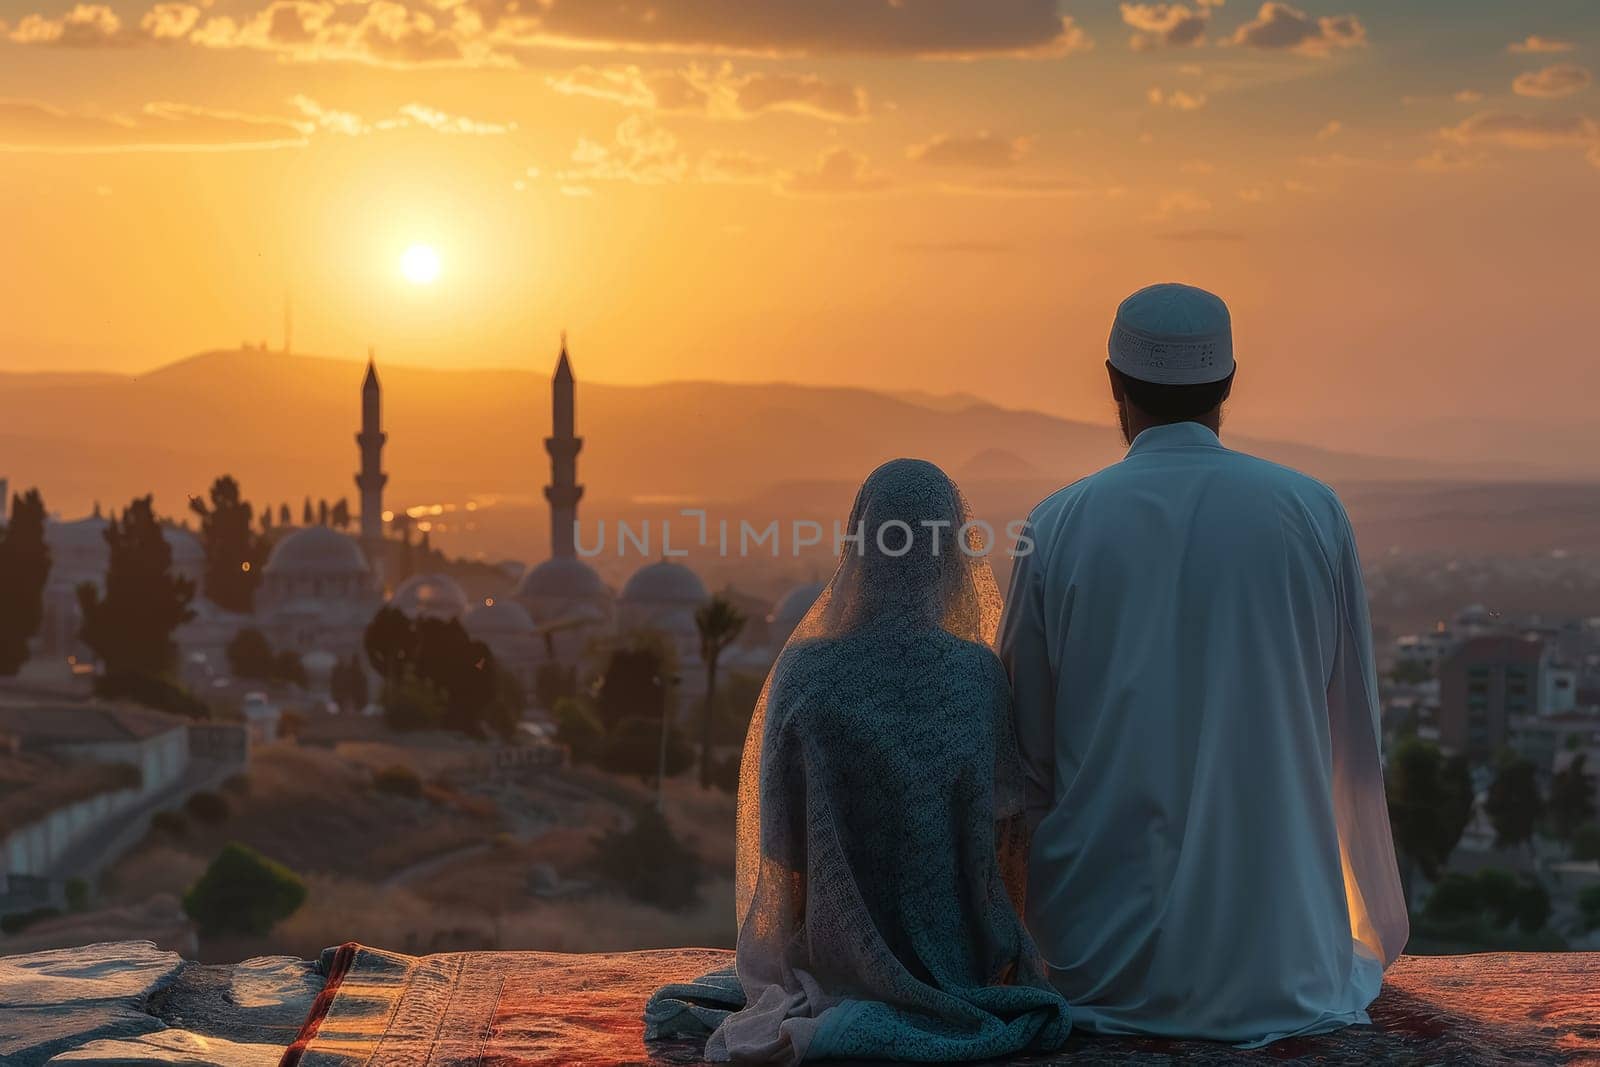 Two individuals sit side by side, overlooking a cityscape at sunset. The serene scene captures a moment of peaceful reflection against a backdrop of distant minarets.